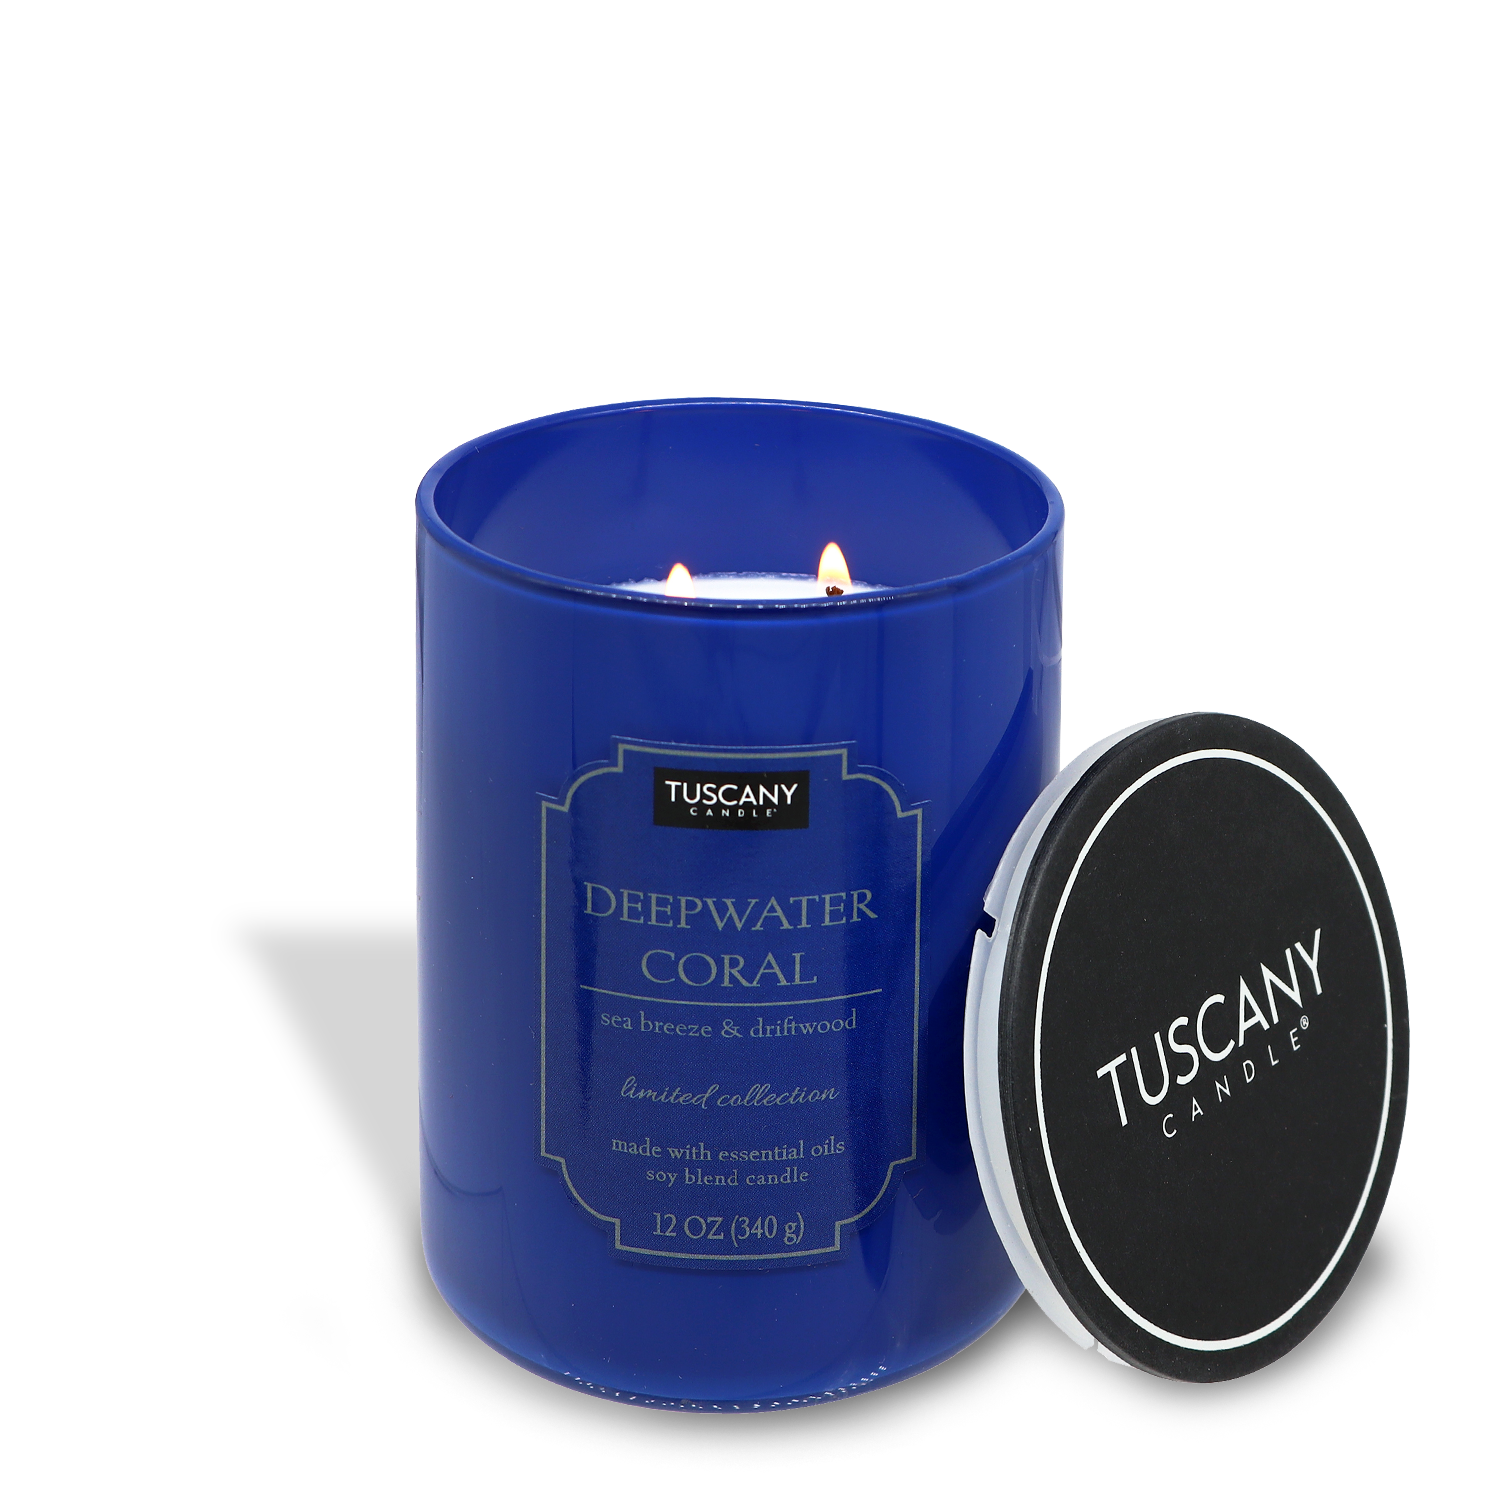 Blue candle labeled "Deepwater Coral (12 oz) – Colorsplash Collection" by Tuscany Candle® EVD, lit, with its black lid off to the side, against a white background.